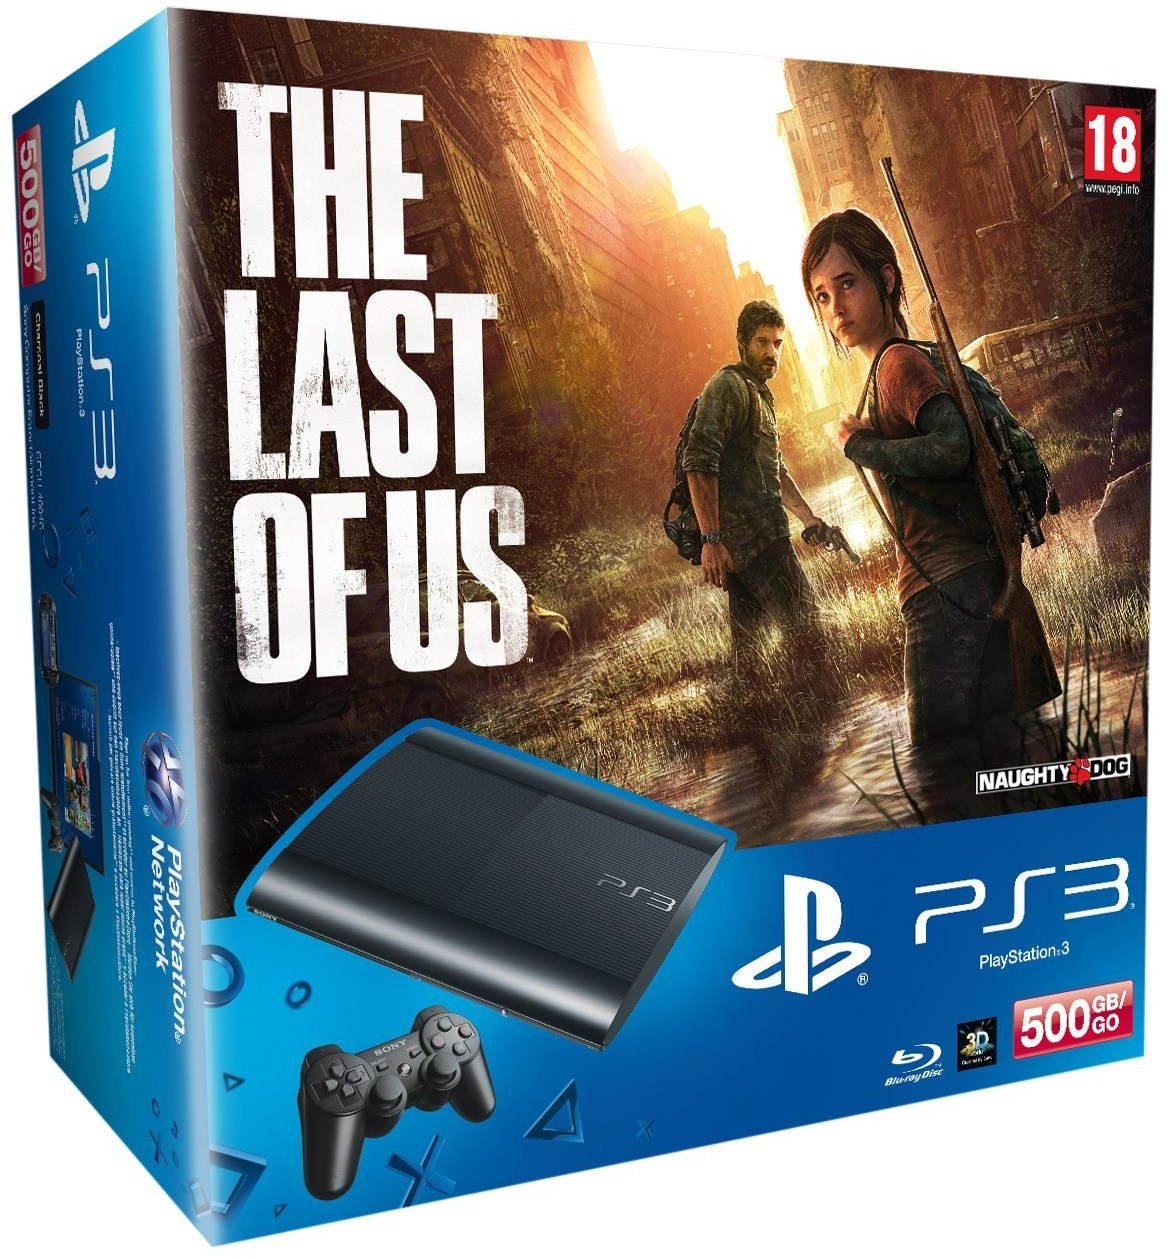 Sony PlayStation 3 Slim New 500GB + The Last Of US - Game Console